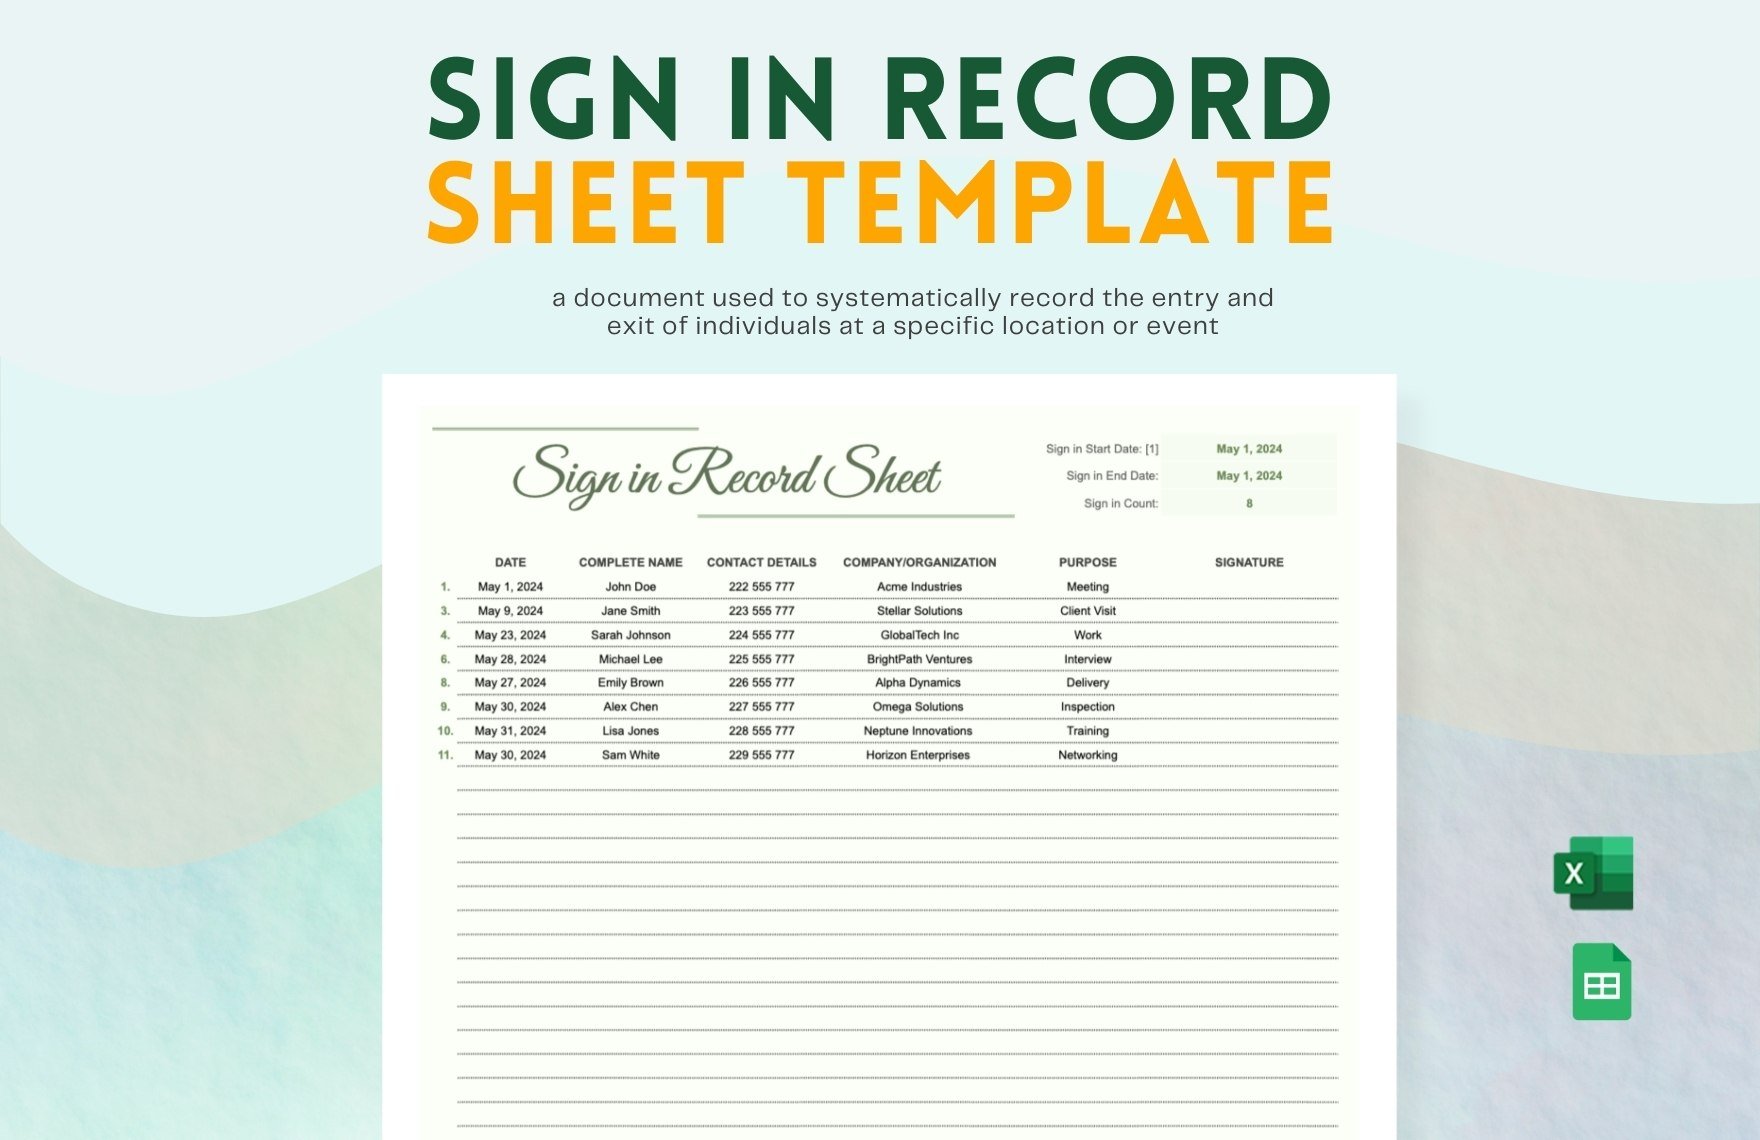 Free Sign in Record Sheet Template in Excel, Google Sheets